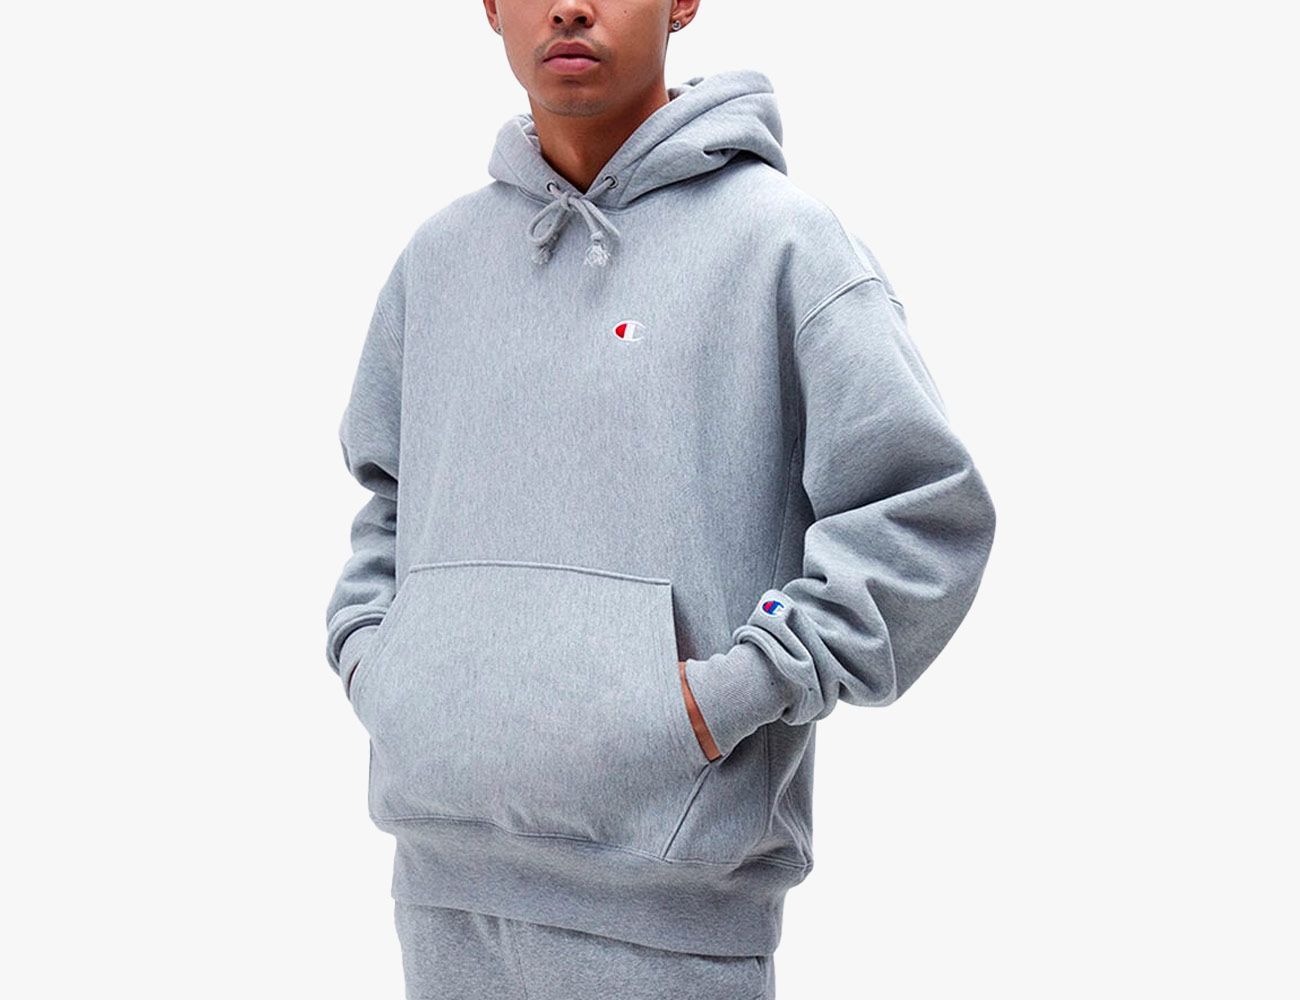 most iconic hoodies - OFF-66% >Free Delivery